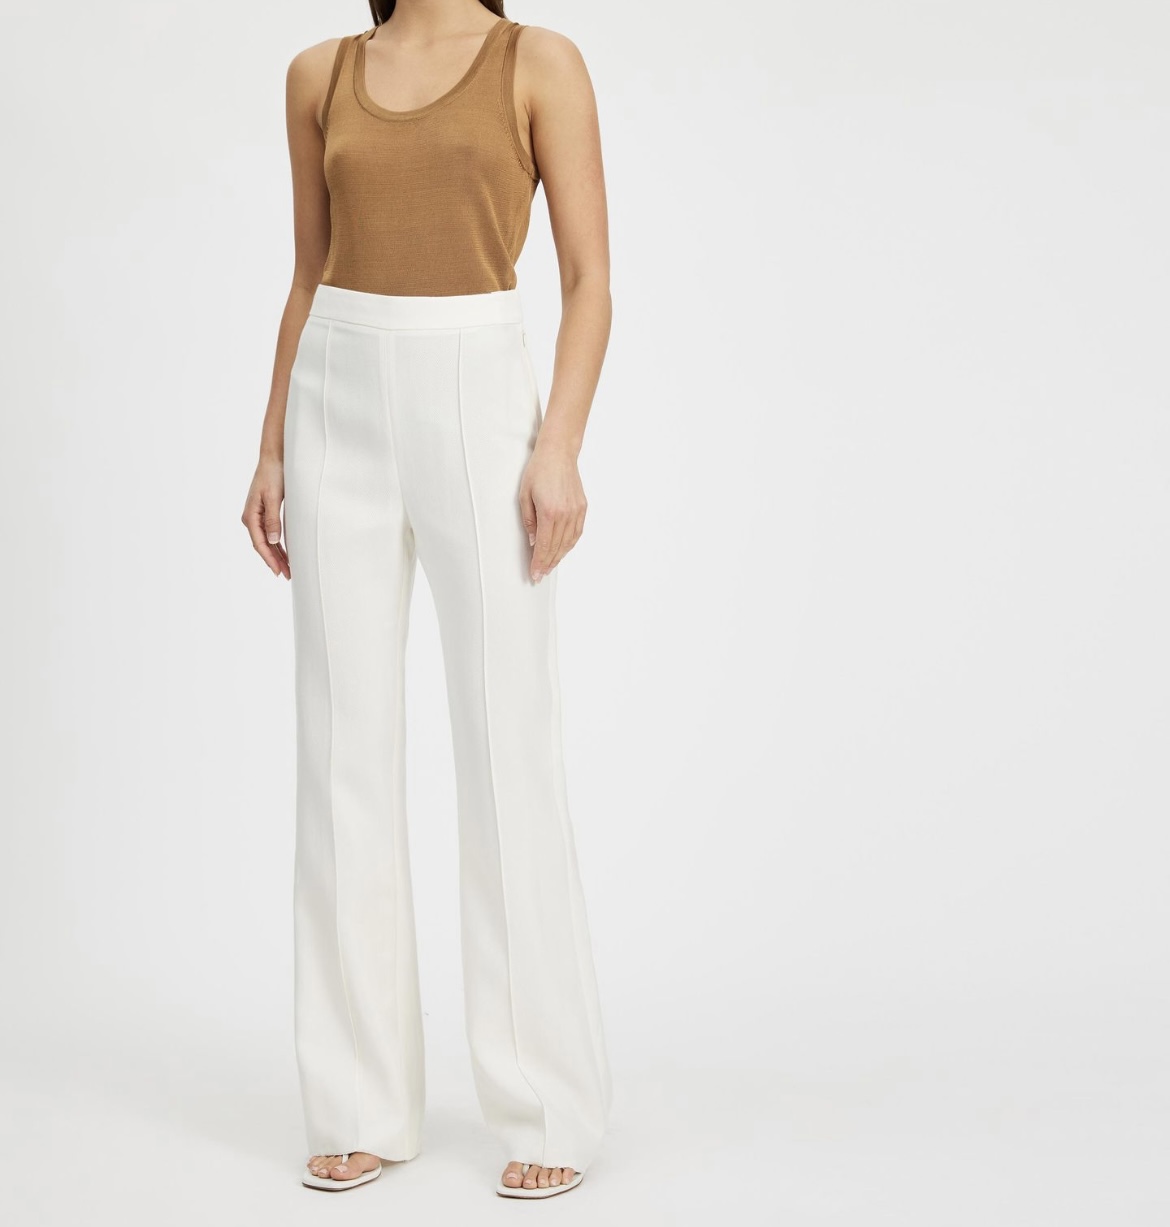 Camilla and Marc Alina Wide Leg Pants for rent.